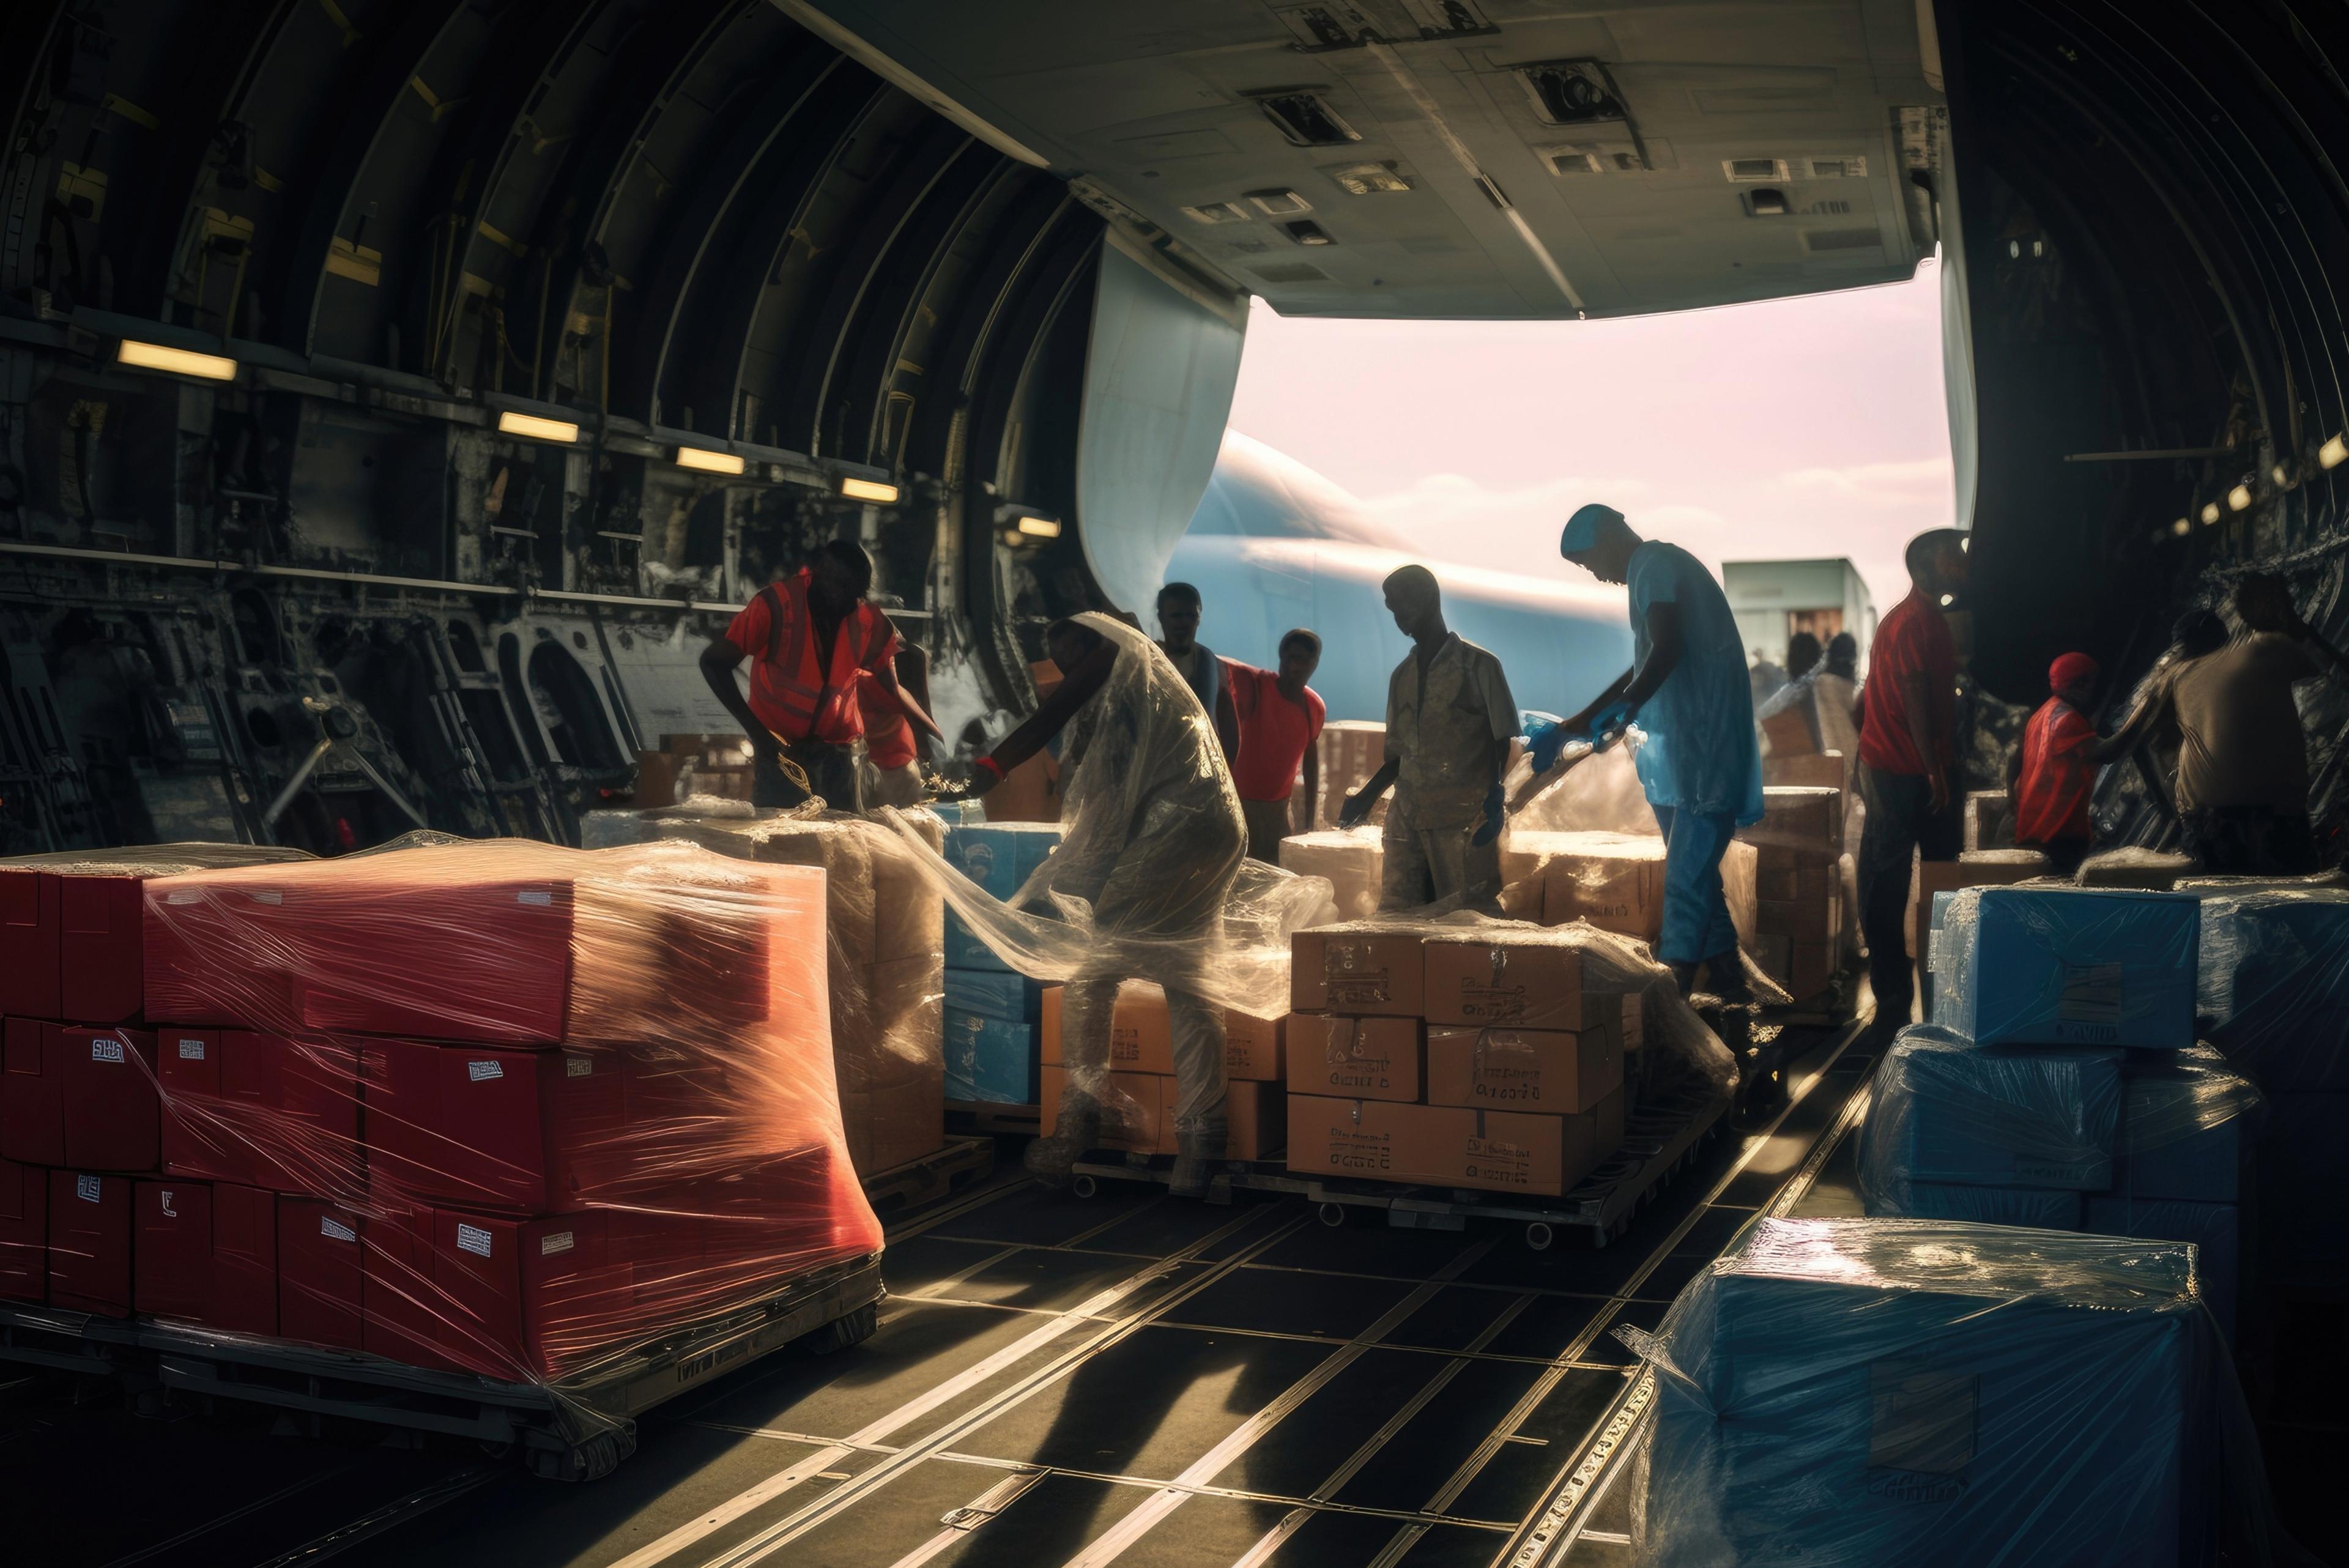 “Interior view of a cargo plane, filled with boxes of medical supplies, symbolising the aviation industry’s response to the COVID-19 pandemic